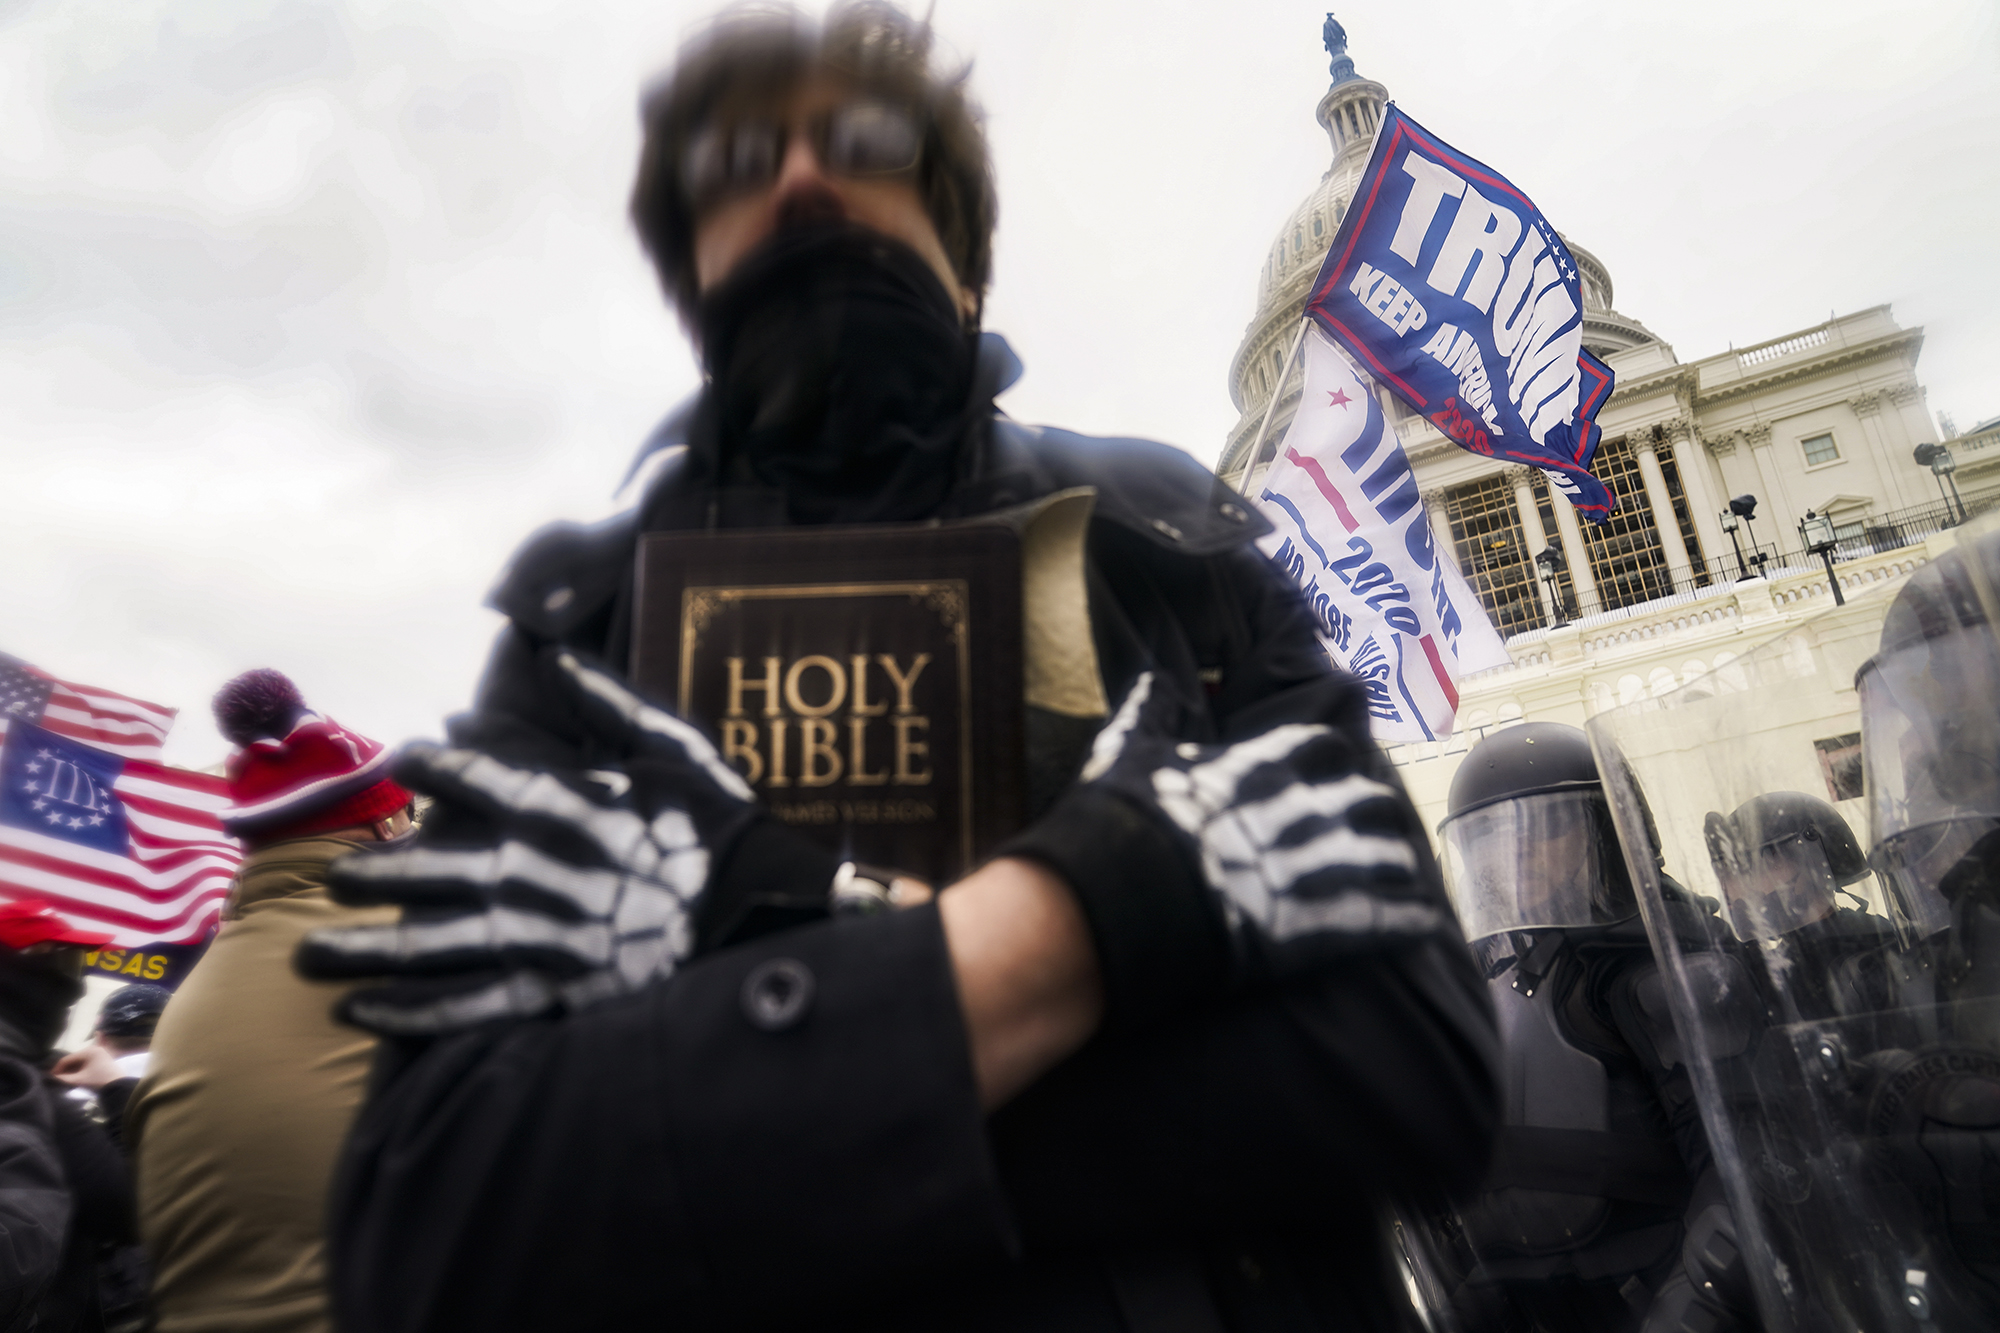 FILE - In this Wednesday, Jan. 6, 2021 file photo, a man holds a Bible as Trump supporters gather outside the Capitol in Washington. The Christian imagery and rhetoric on view during this month’s Capitol insurrection are sparking renewed debate about the societal effects of melding Christian faith with an exclusionary breed of nationalism. (AP Photo/John Minchillo)